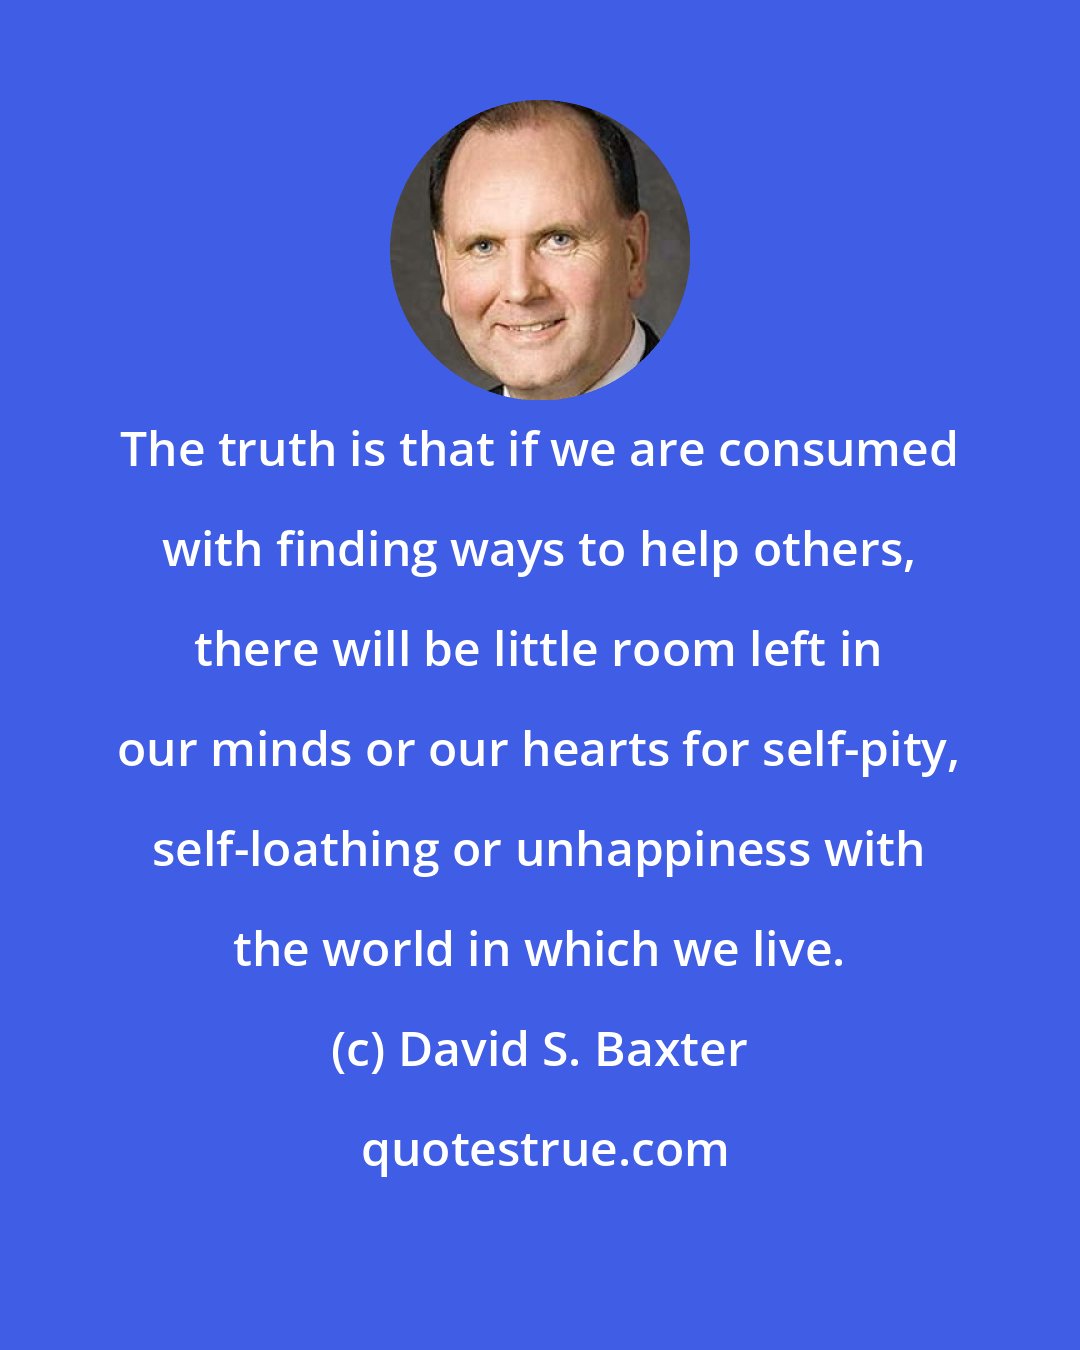 David S. Baxter: The truth is that if we are consumed with finding ways to help others, there will be little room left in our minds or our hearts for self-pity, self-loathing or unhappiness with the world in which we live.